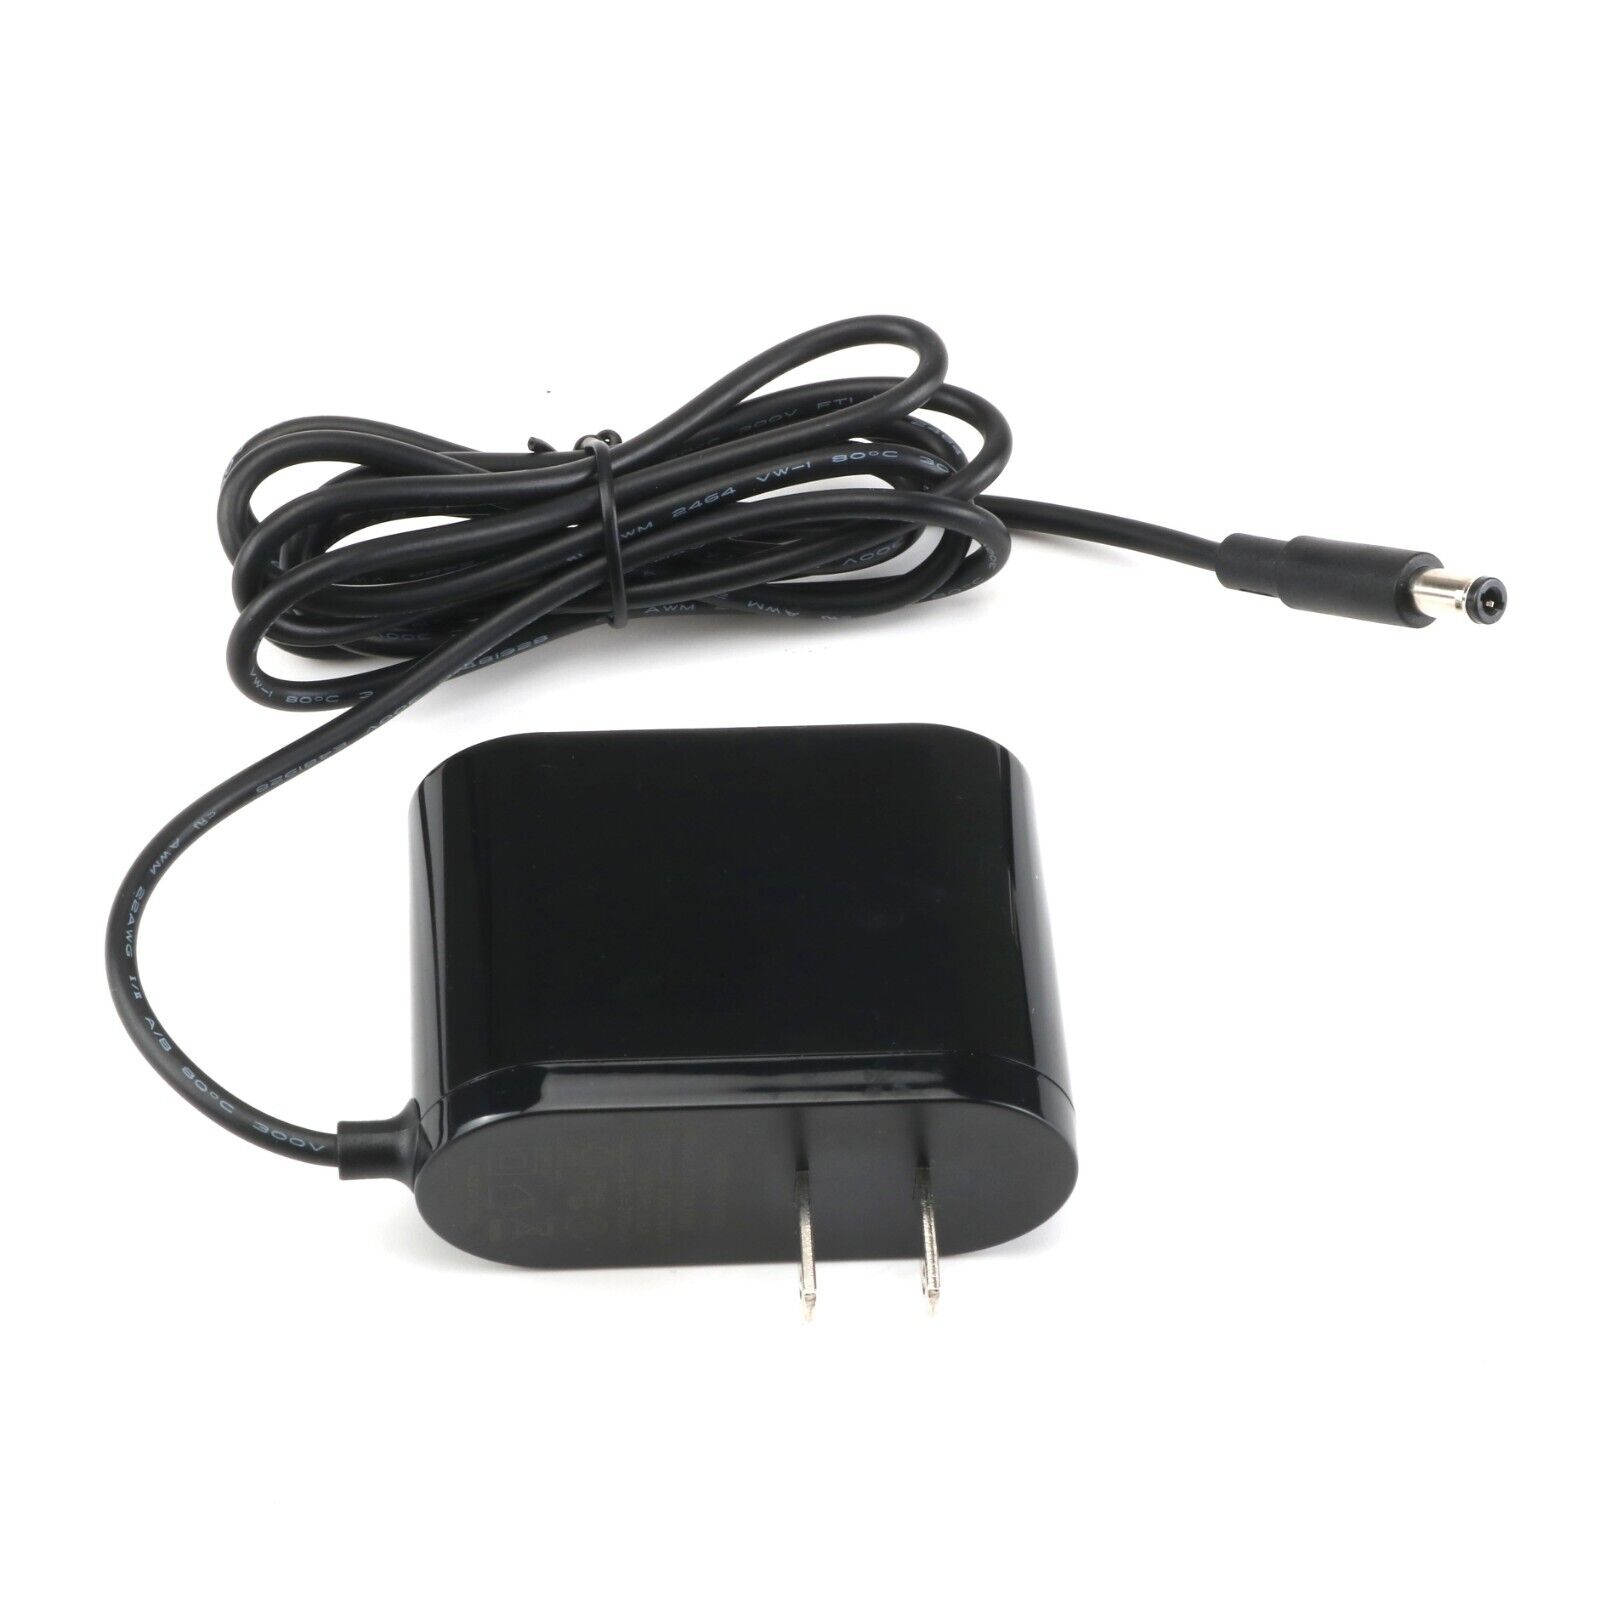 【2 pack】12W 12V 1A power adapter with power cord DC plug GA-1202000 5.5mm*2.5mm